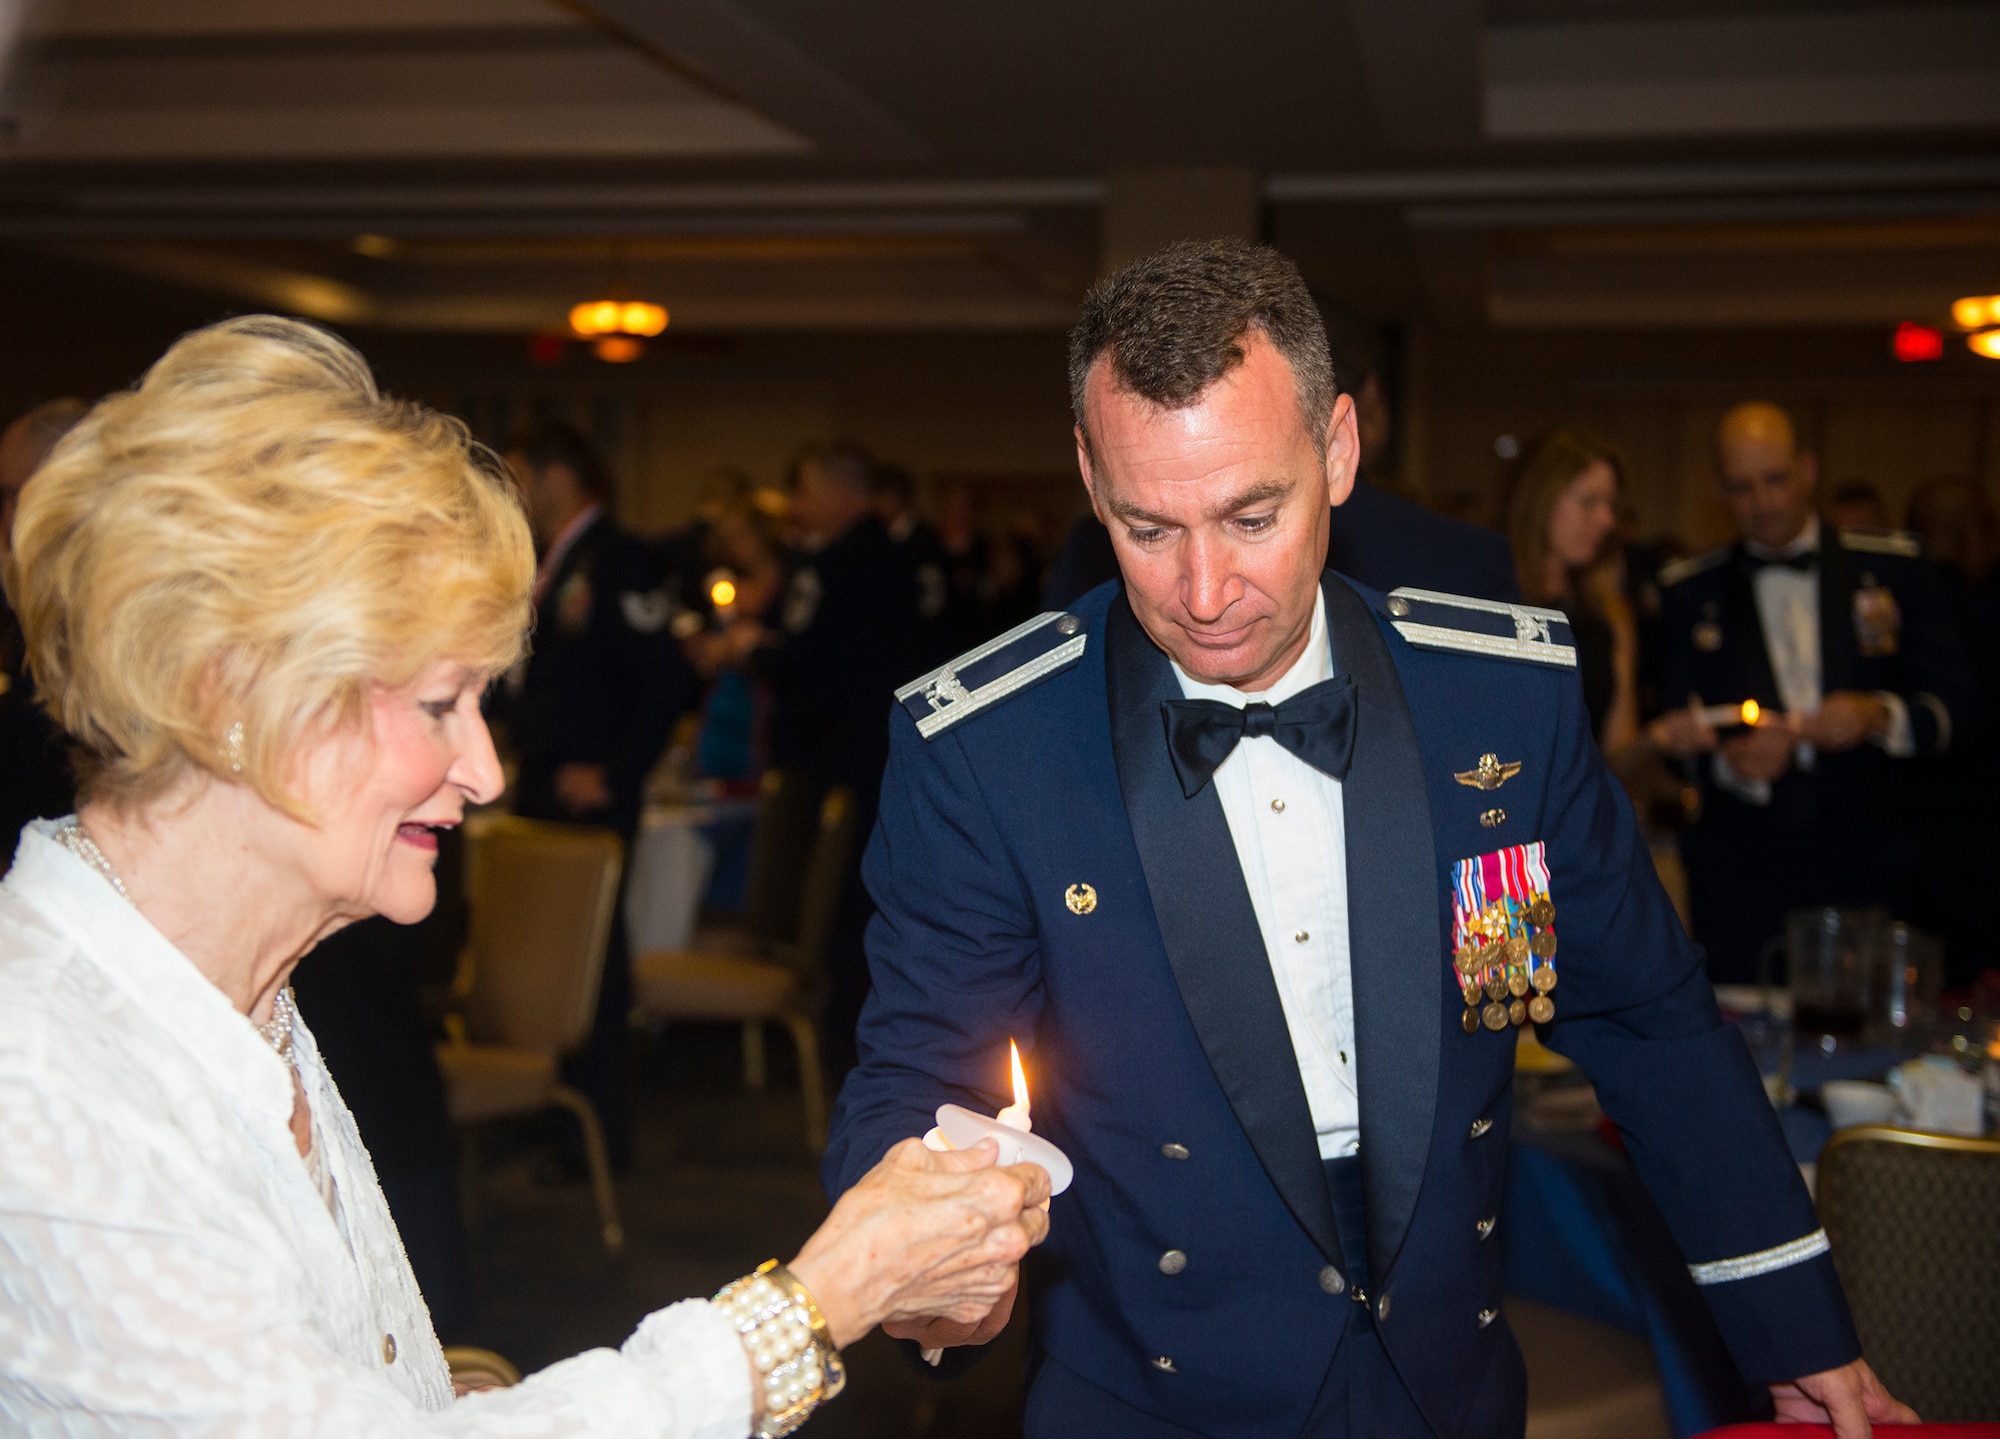 U.S. Air Force Col. Chad Franks, 23d Wing commander, and Dr. Lucy Green light their candles during a senior NCO induction ceremony at Moody Air Force Base, Ga., July 25, 2014. At this induction ceremony, the lighting of the candle symbolized knowledge, success, motivation and ideas. (U.S. Air Force photo by Airman 1st Class Ceaira Tinsley/Released)